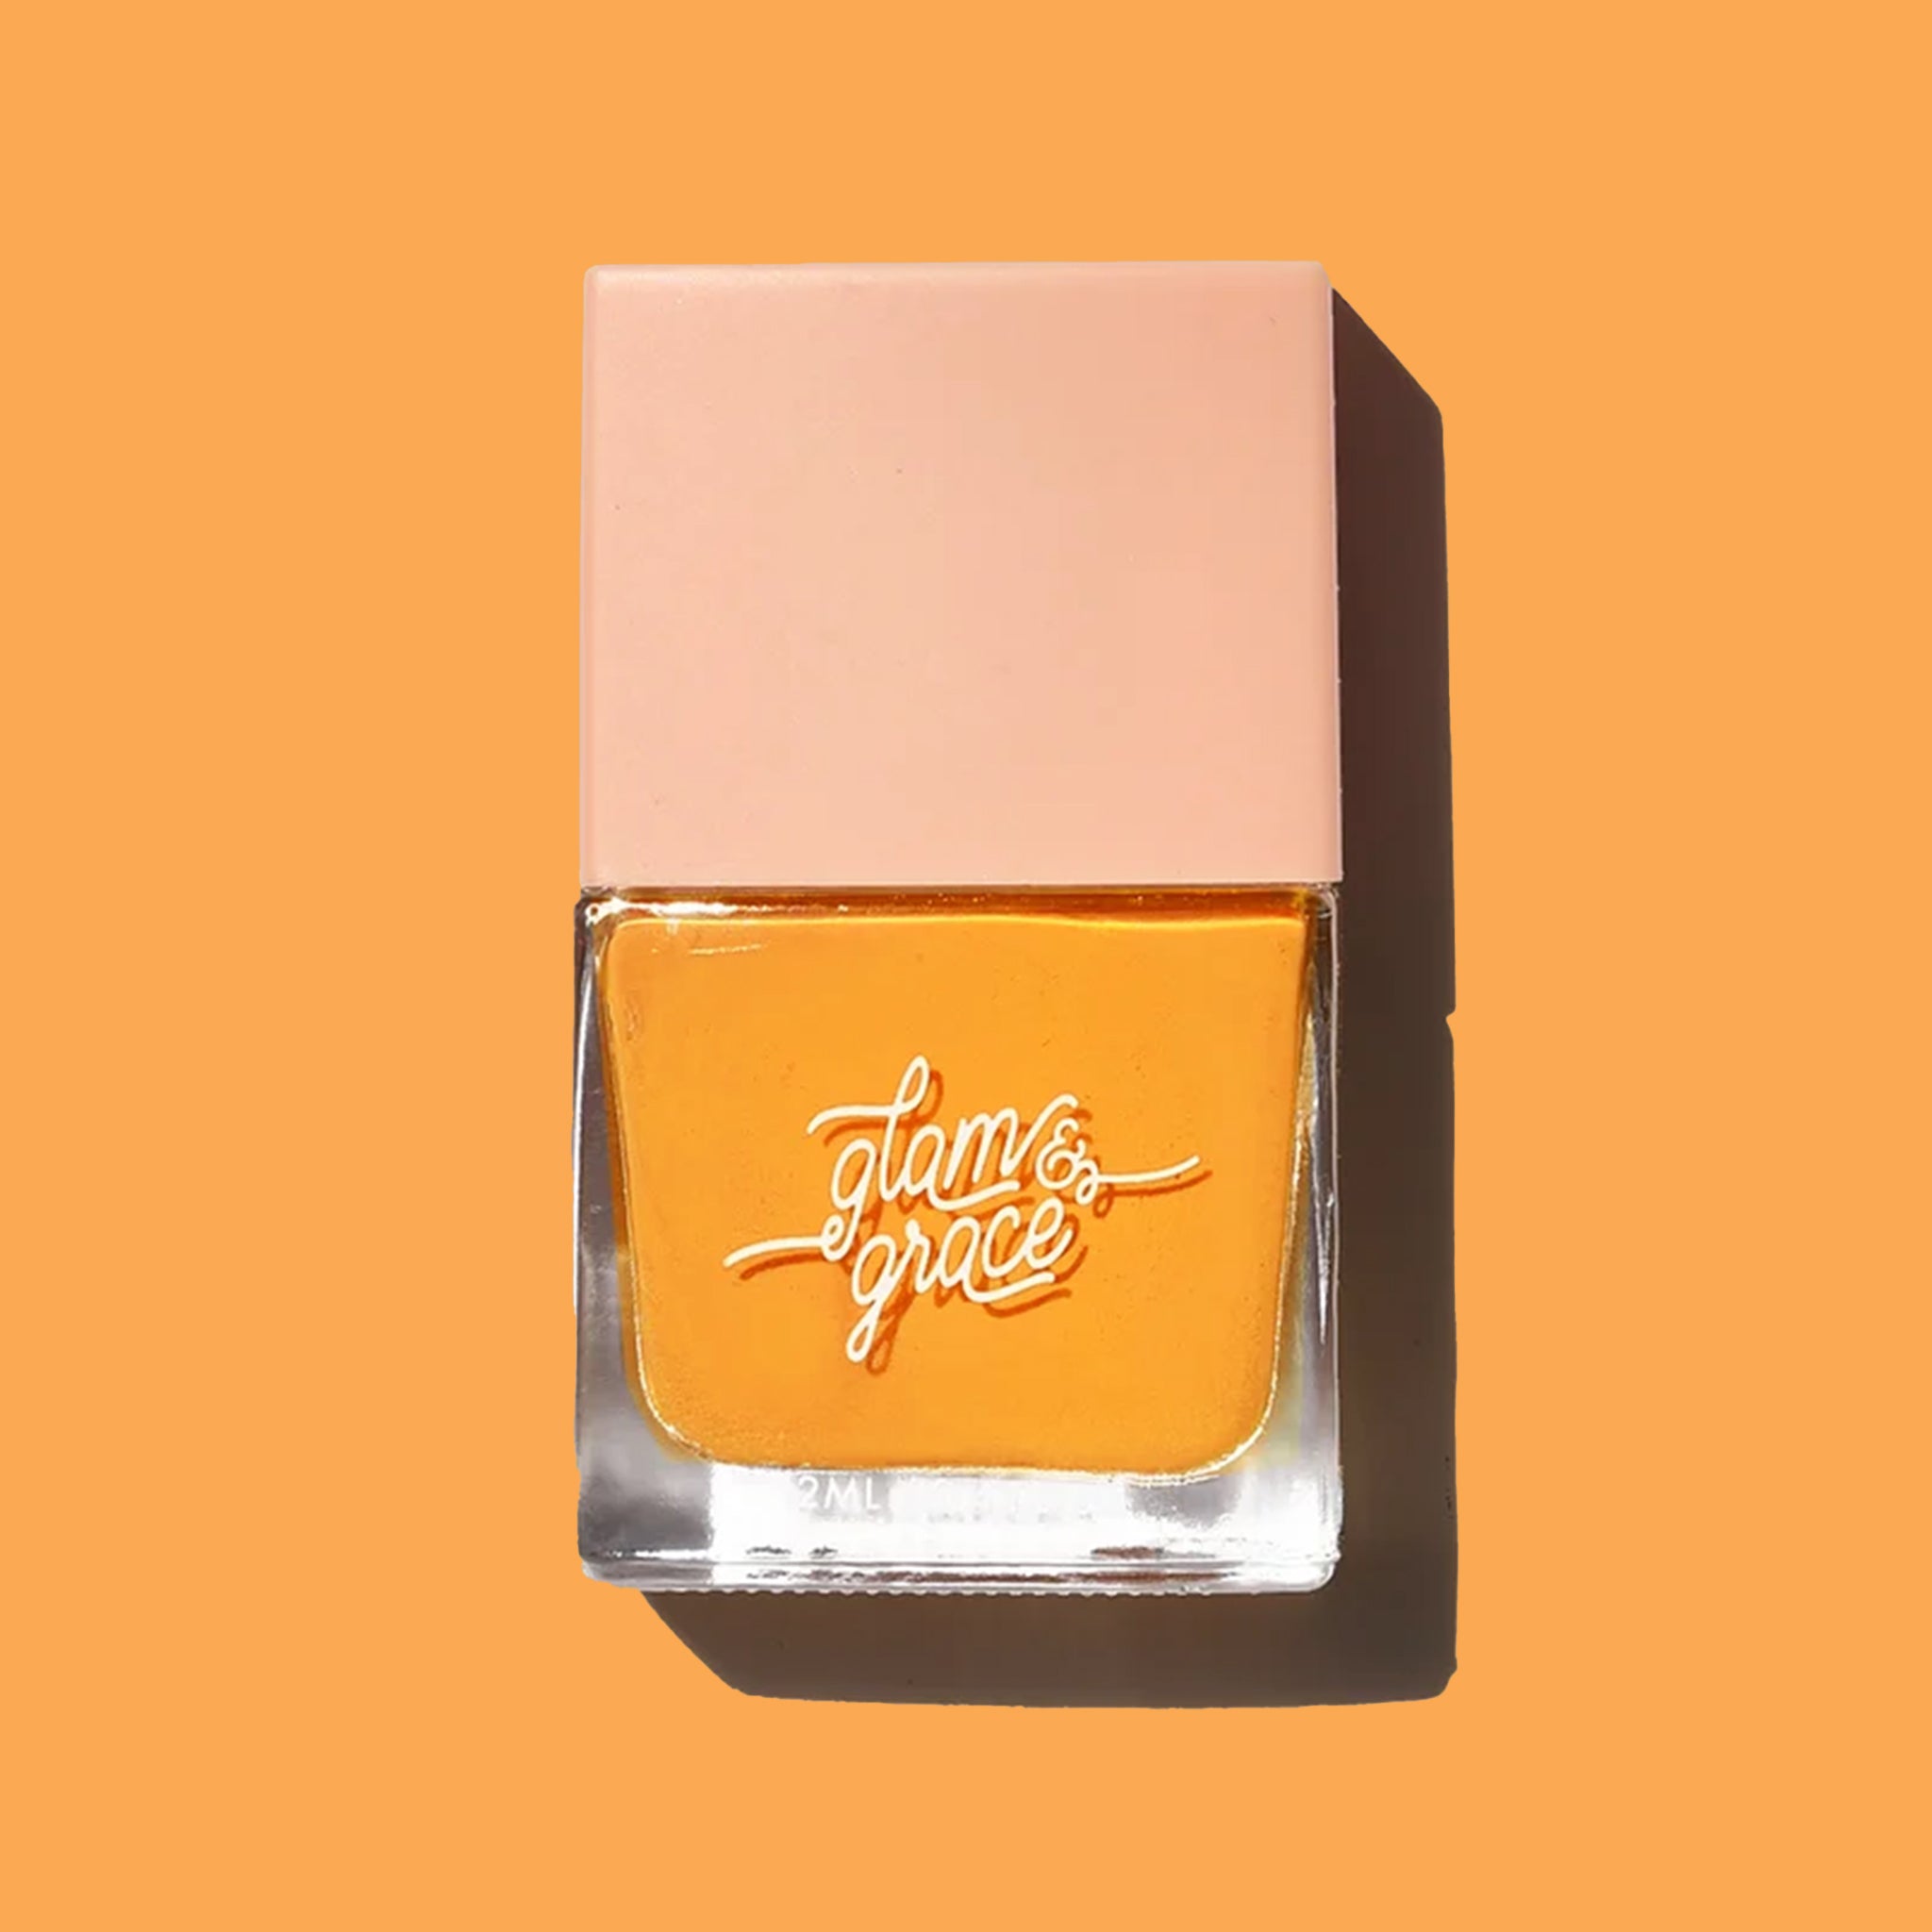 On a orange / yellow background is a square bottle of nail polish. 